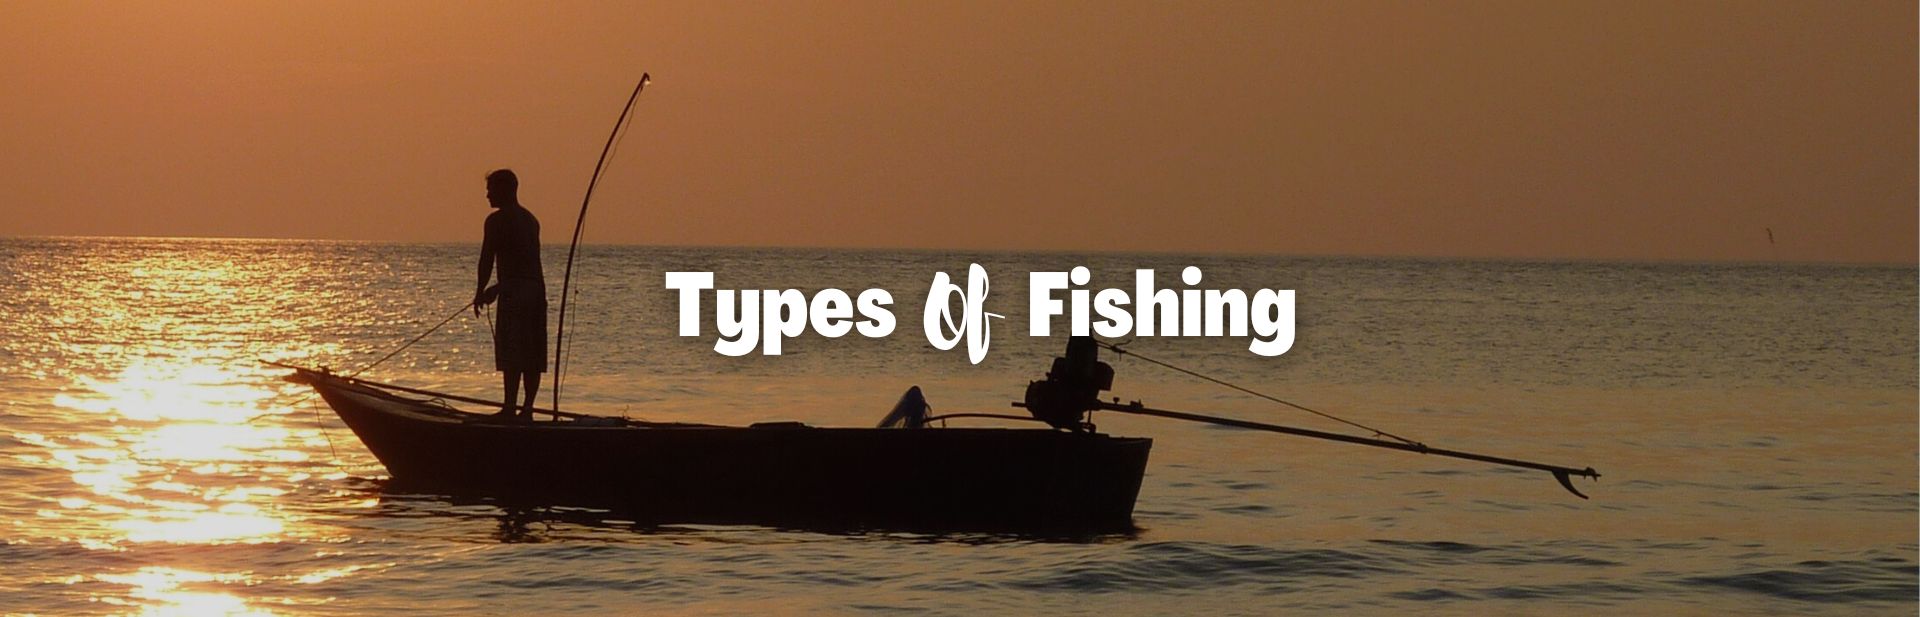 A World of Fishing: Dive into 40 Different Types of Fishing